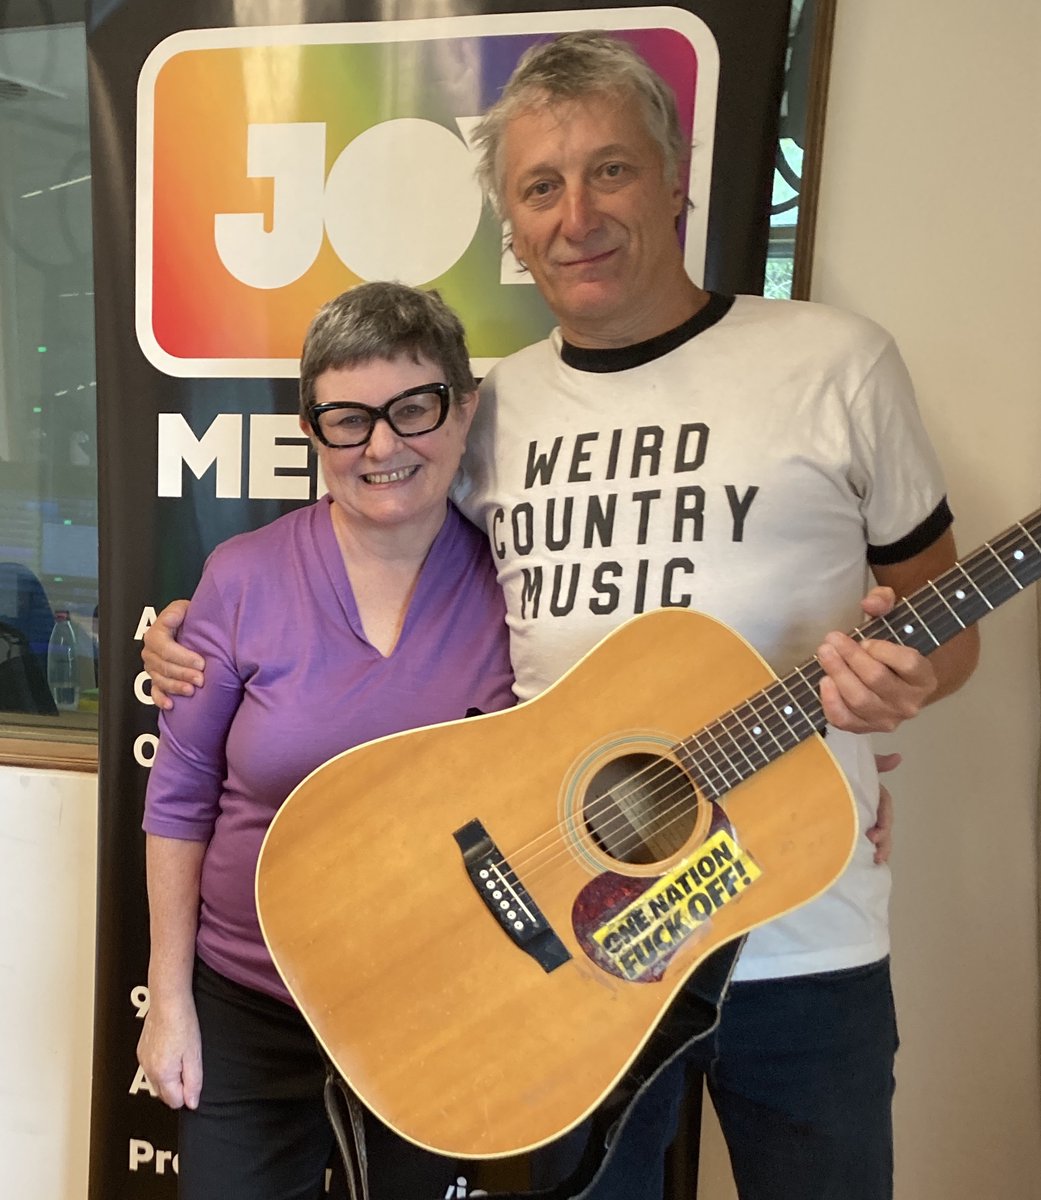 PODCAST: In-studio guest @DanWarnerMusic + fabulous songs by @endofkenny, @alanawilkinson_, Ally Row, The Night Parrots, Renee Geyer, @rubymarygill, Weddings Parties Anything 😀🎶🏳️‍🌈 Hear here: podfollow.com/1215116967 📸 Ande Kempnich